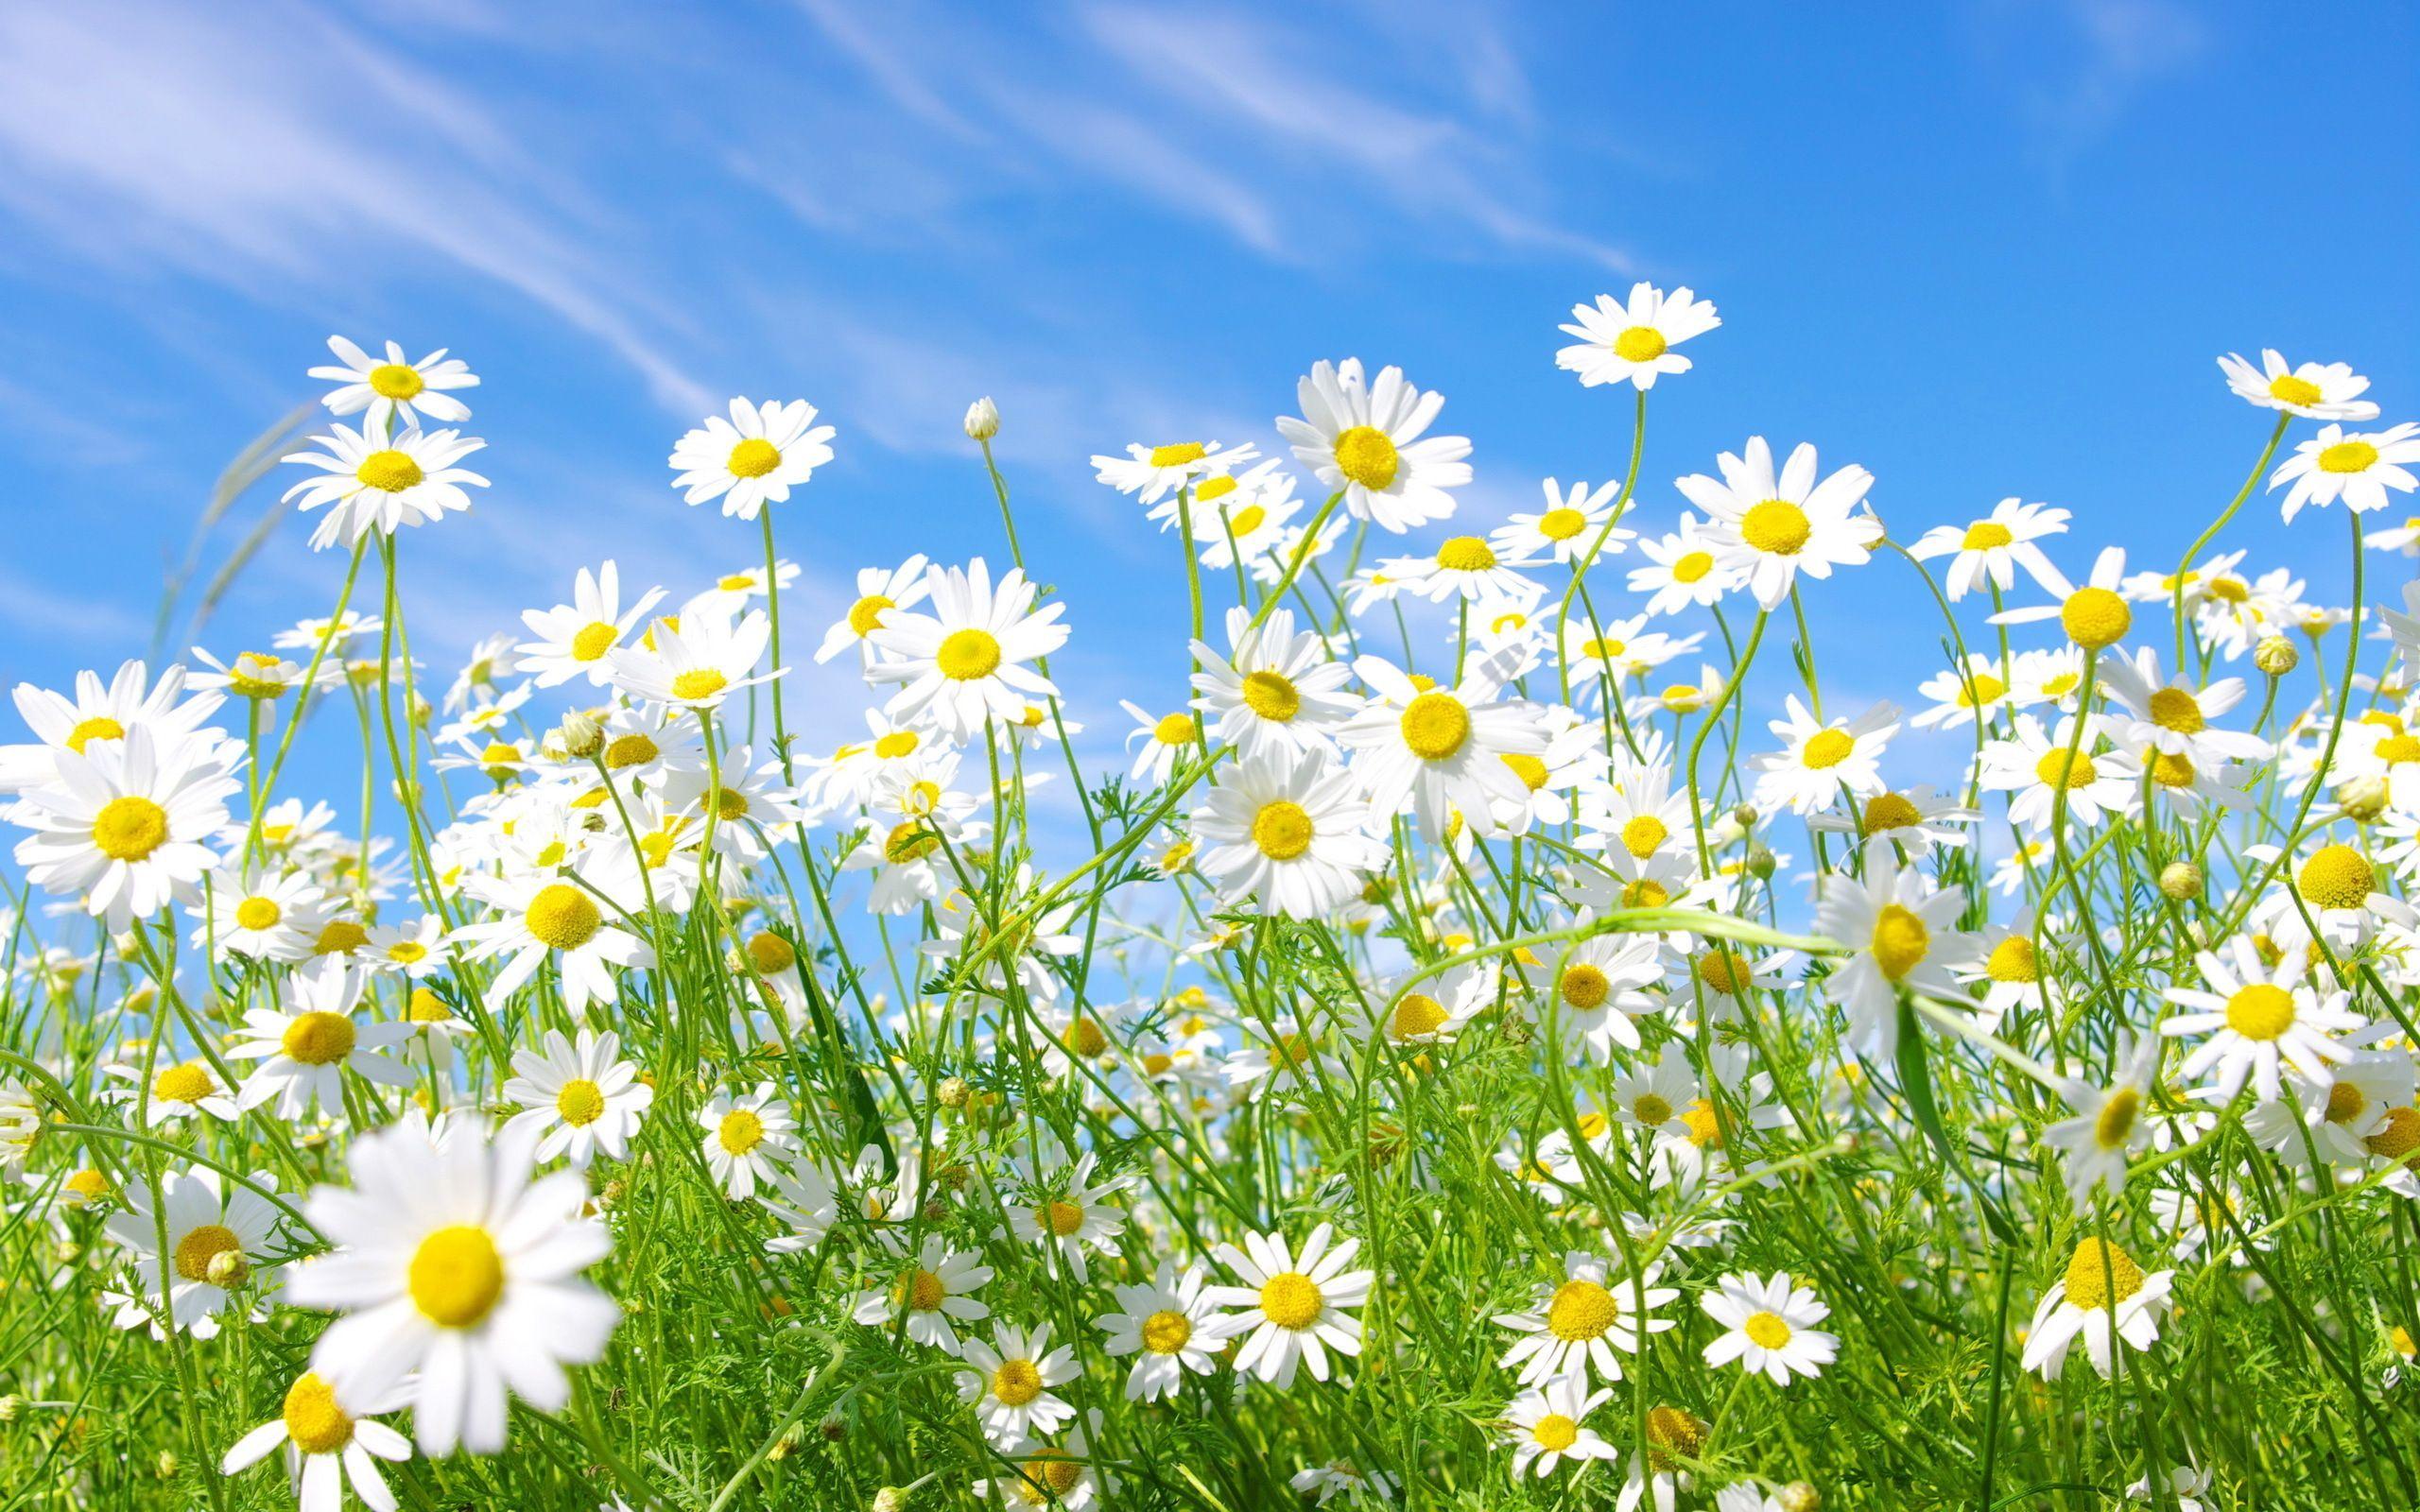 daisies picture. Daisies Meadow Wallpaper Picture Photo Image